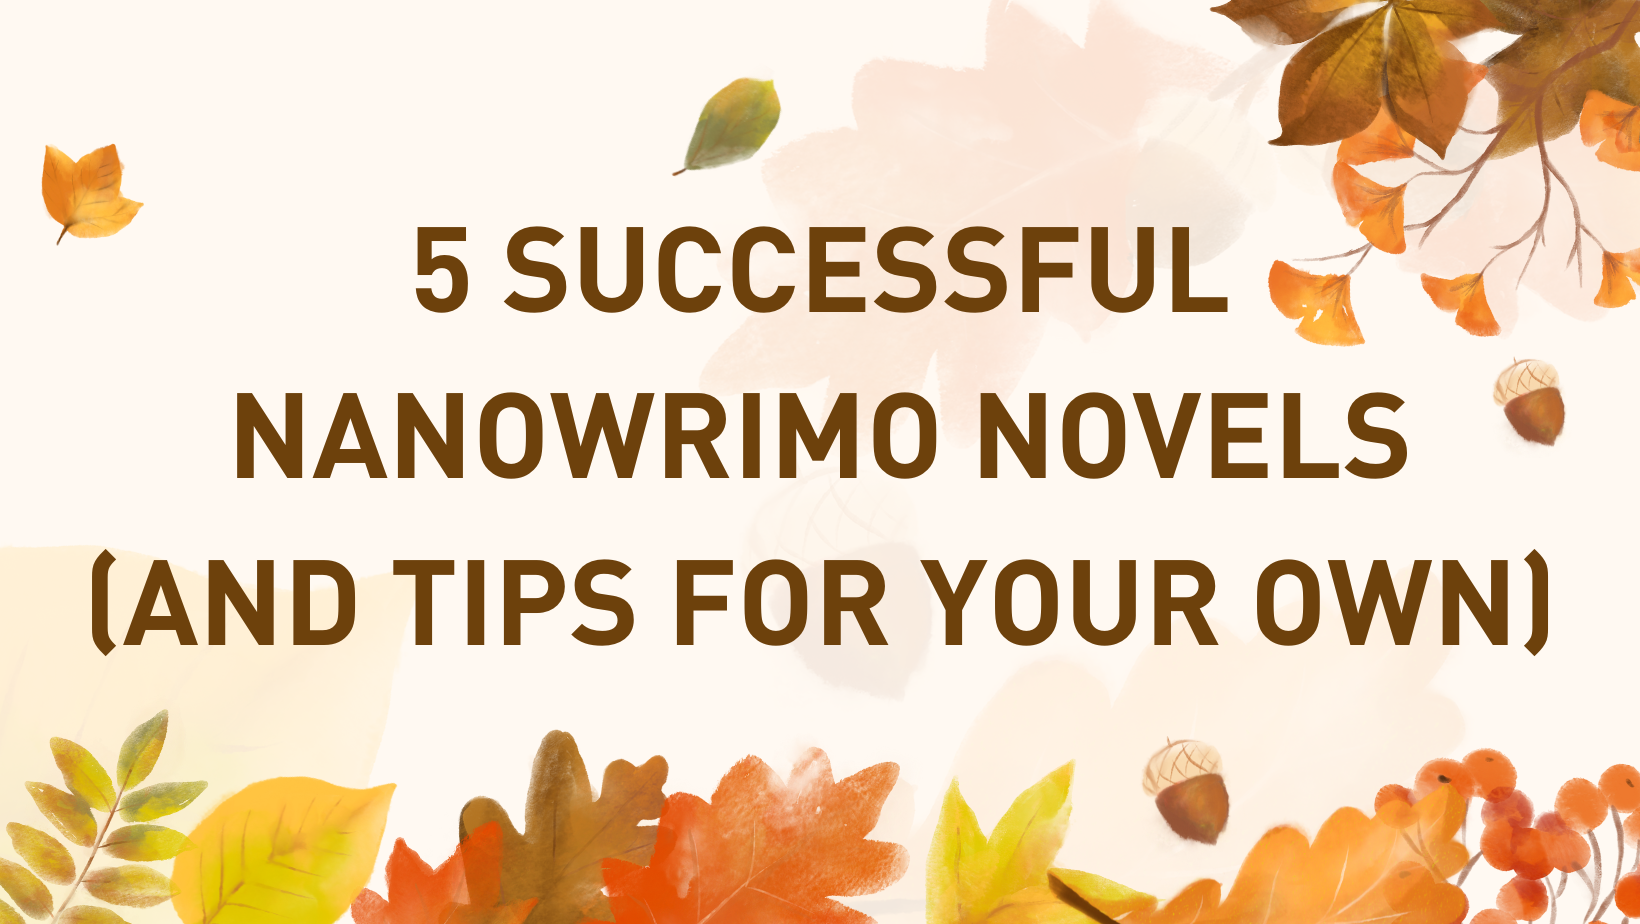 5 Successful NANOWRIMO Novels and Tips for Your Own